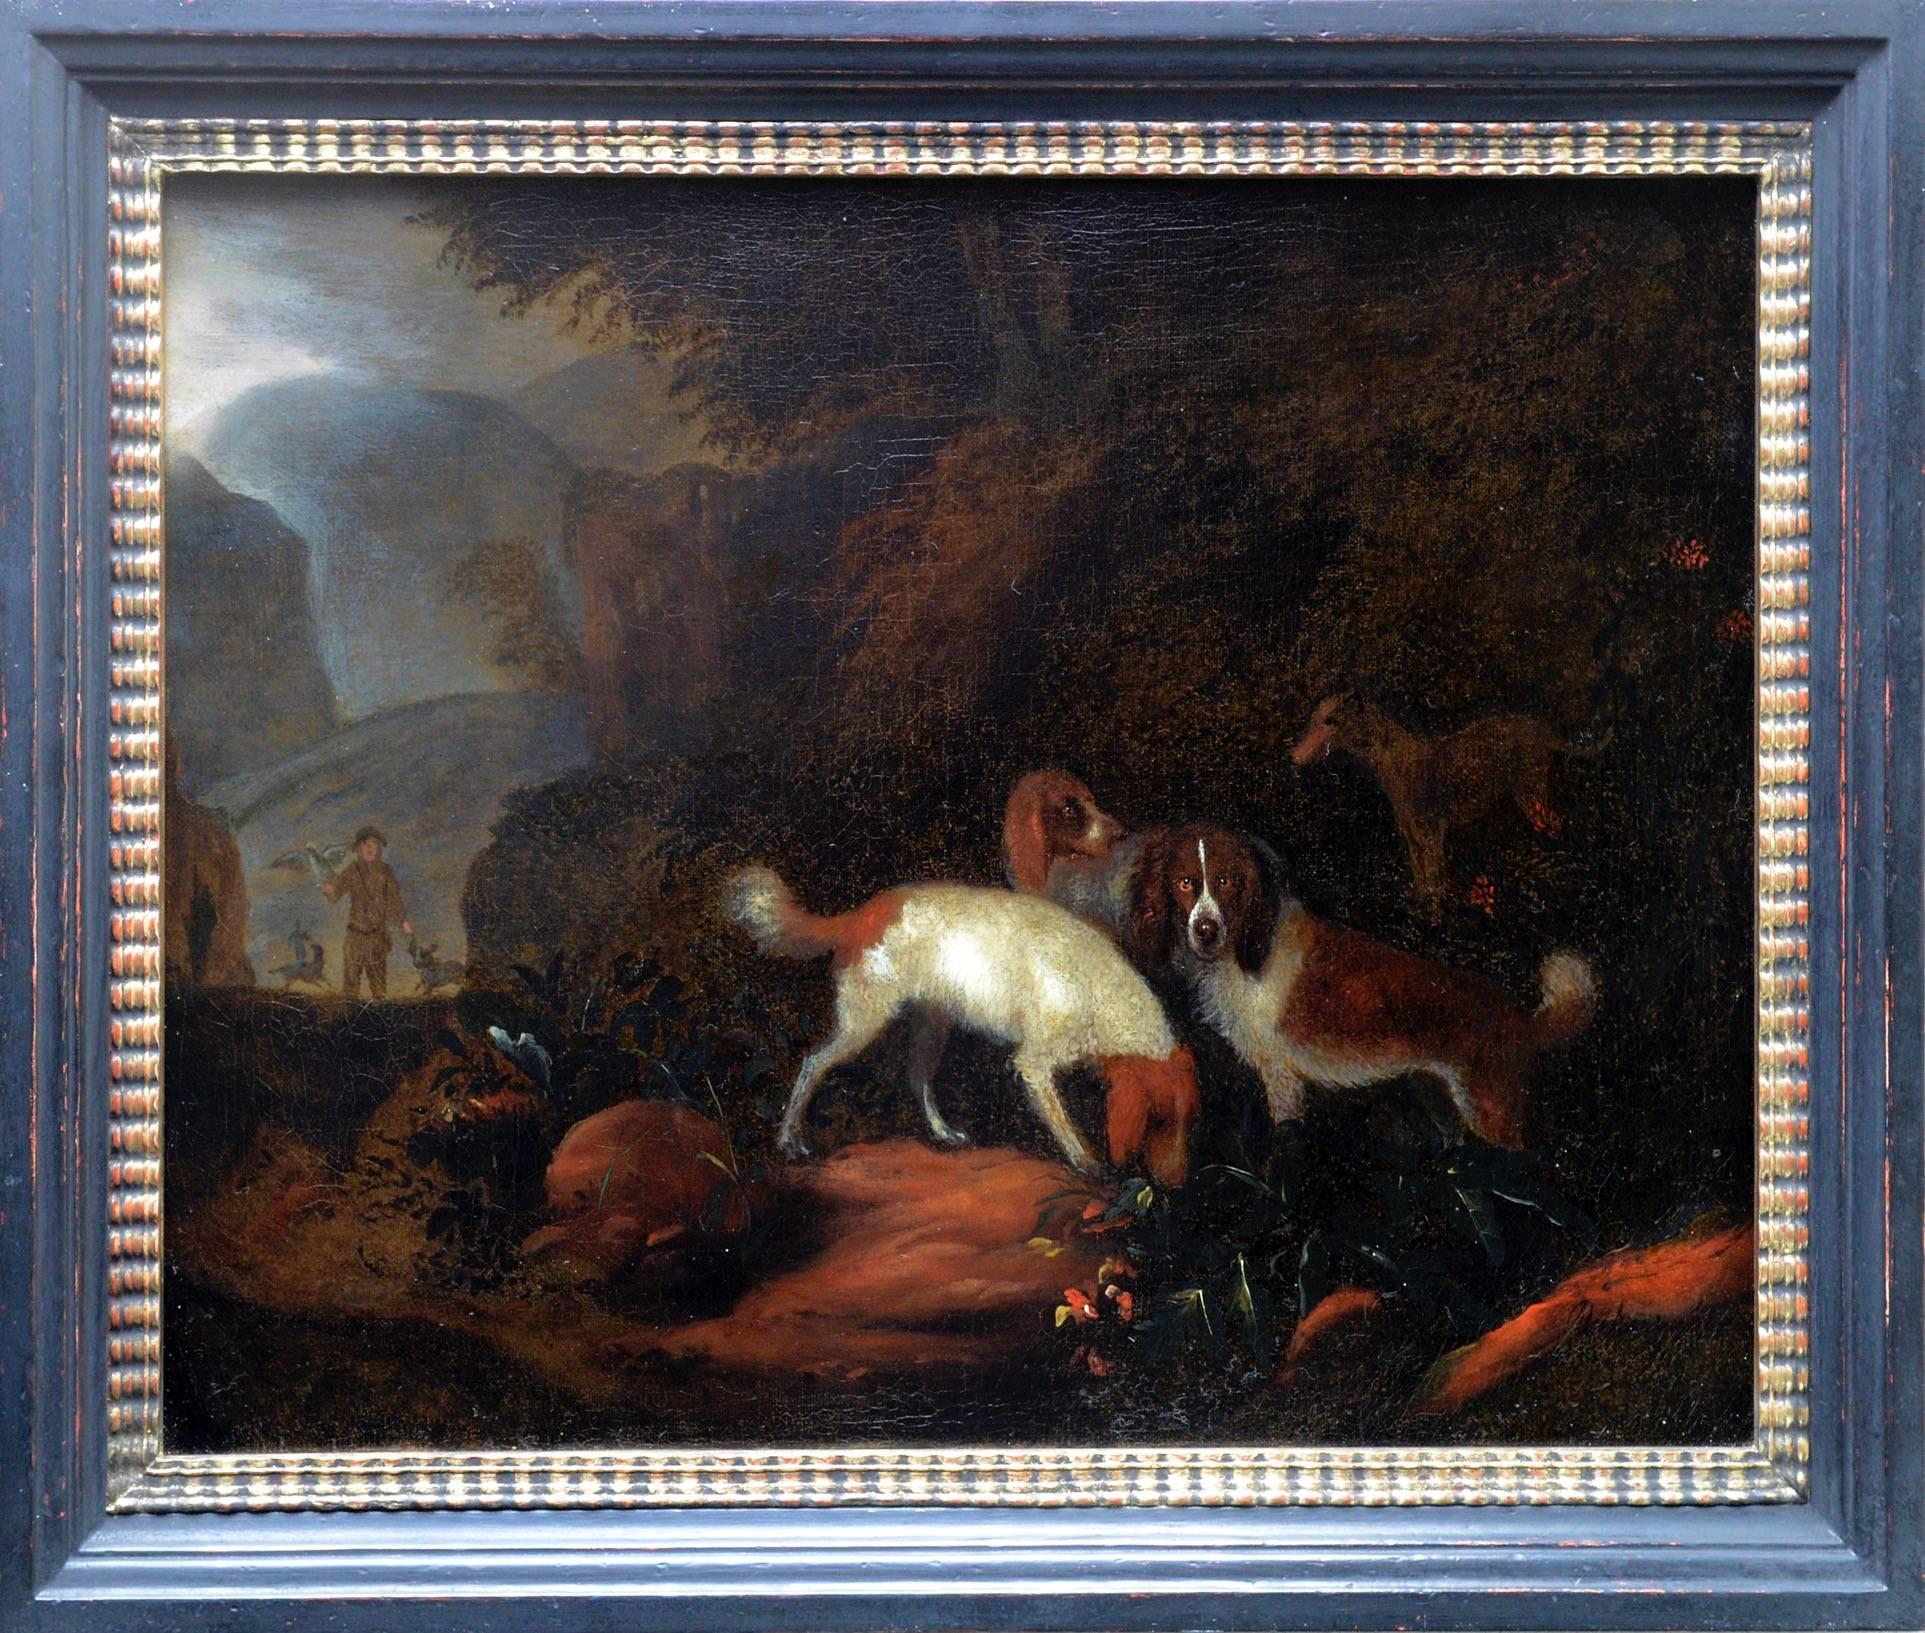 Dutch, 17th century. Pair of hunting scenes with dogs - Painting by Circle of Adriaen Cornelisz Beeldemaker